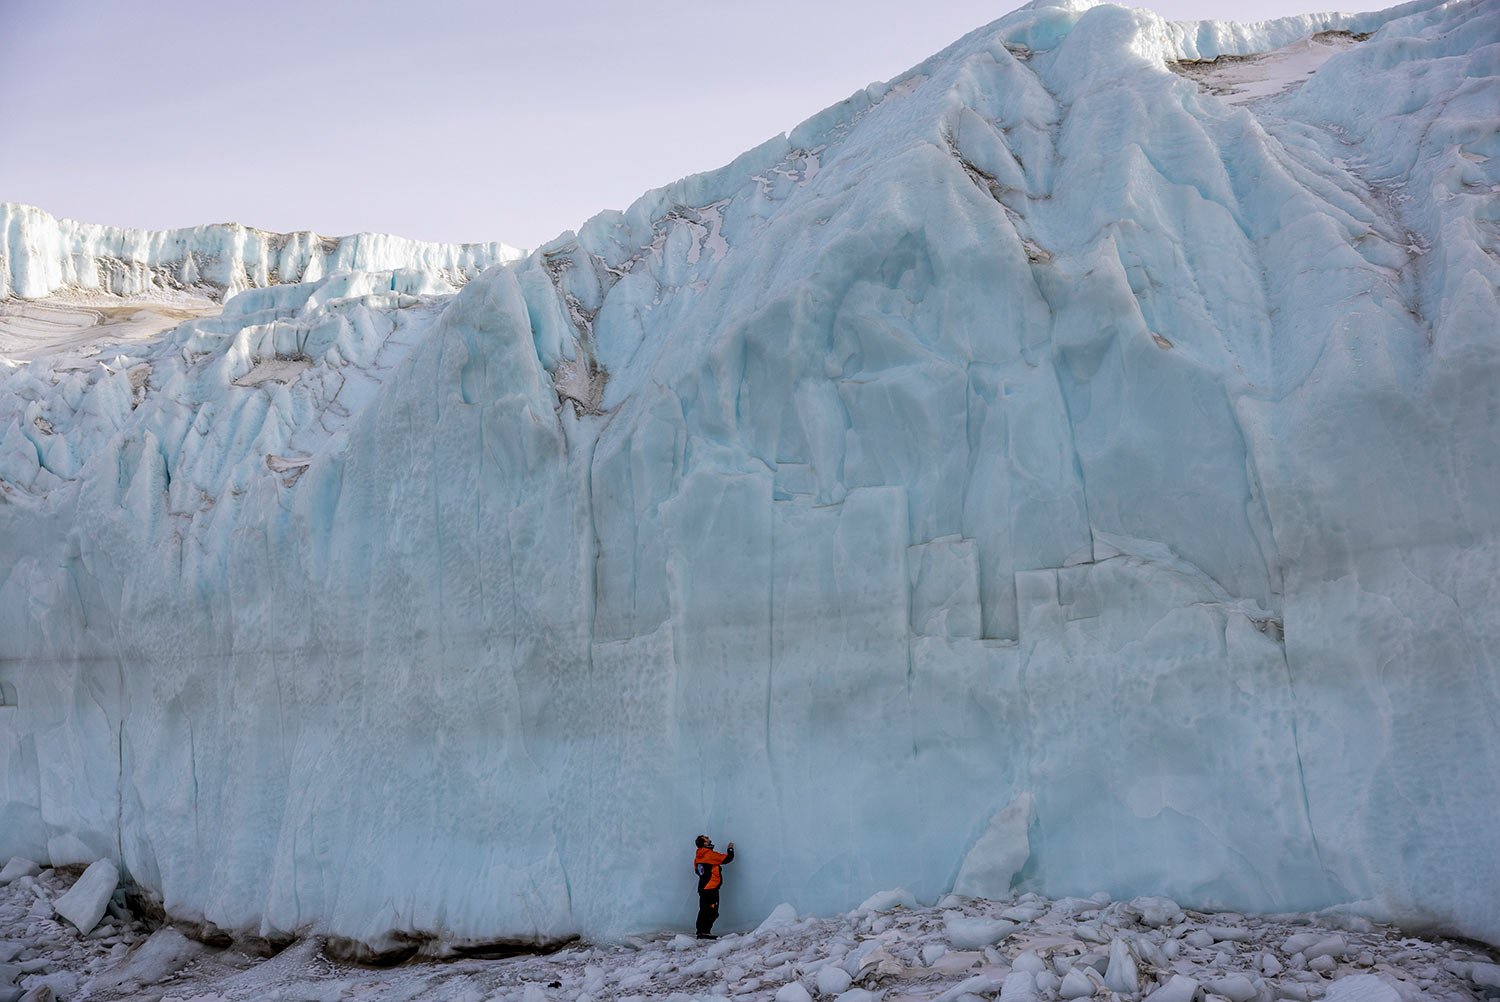  Shayne Misselbrook stands in front of a glacier in the Taylor Valley in Antarctica, Thursday, Oct. 27, 2022. (Mike Scott/NZ Herald via AP, Pool) 